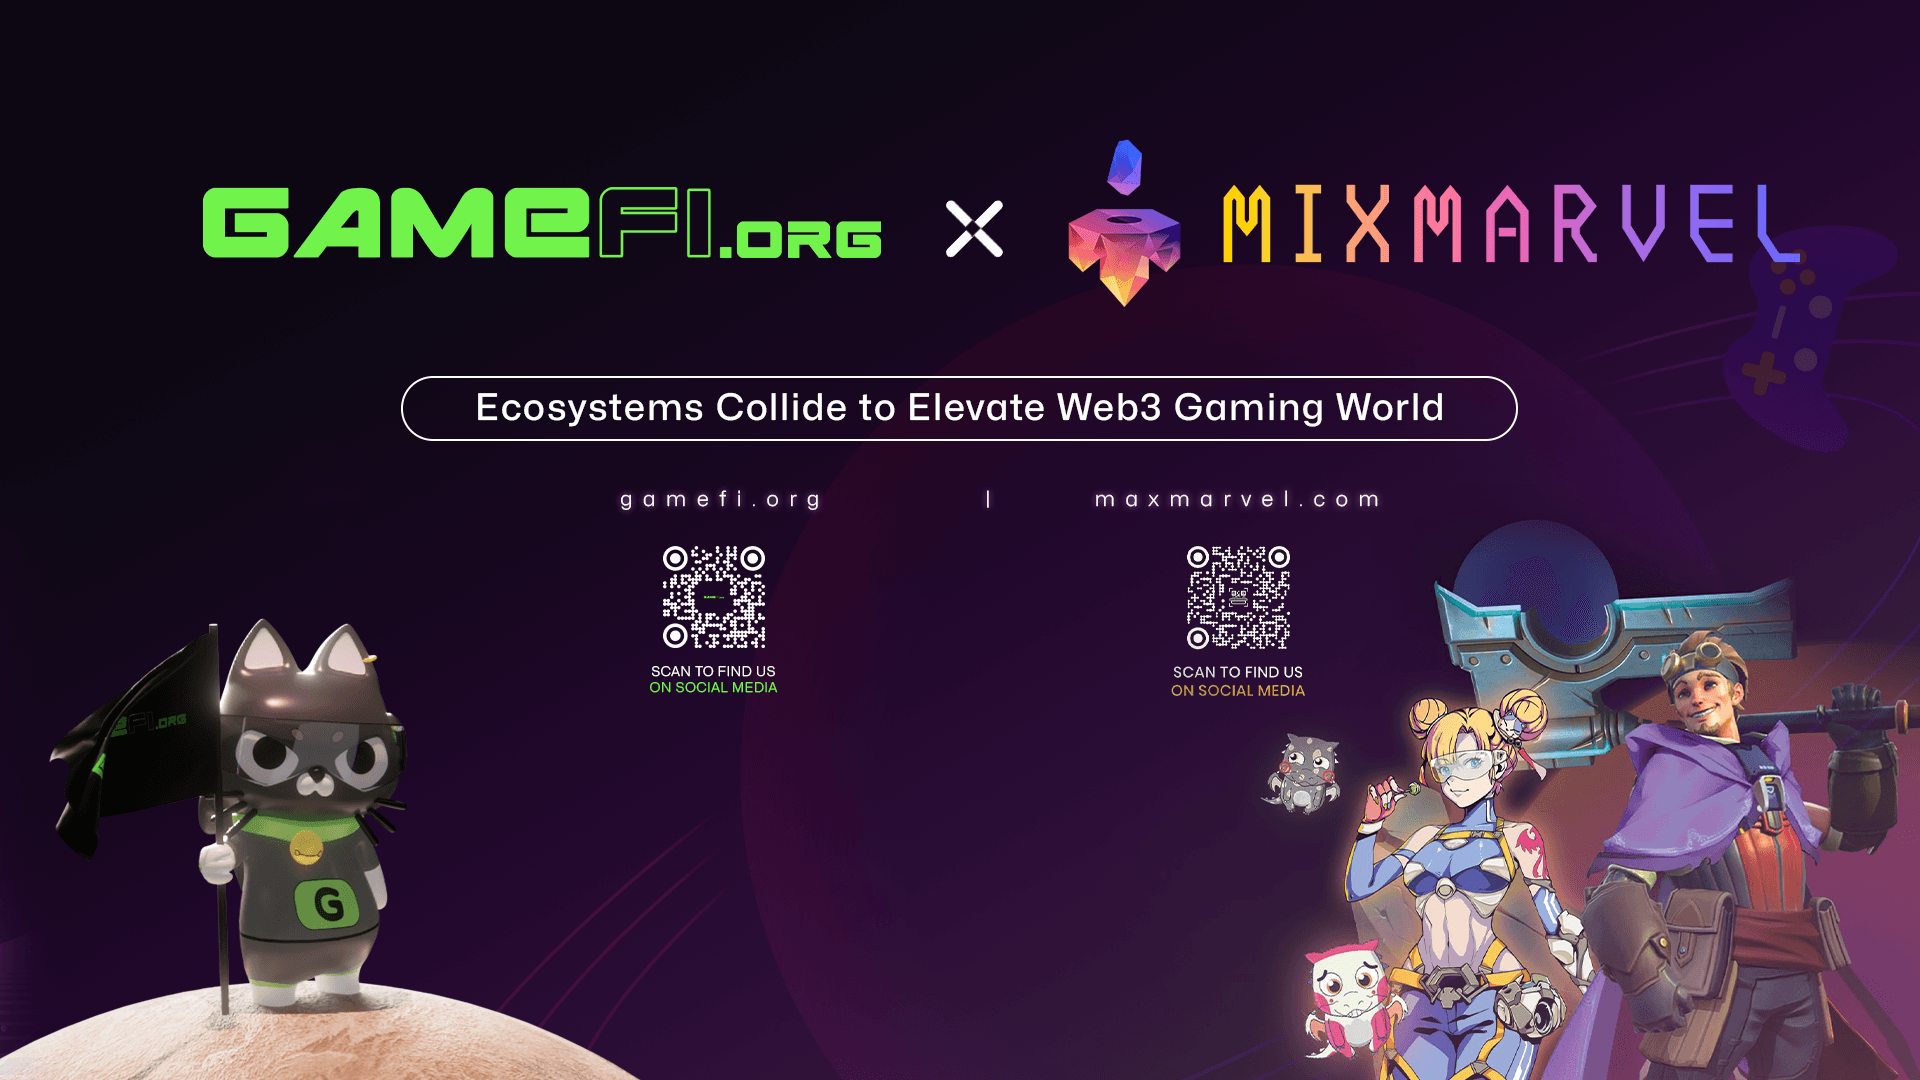 GameFi.org & MixMarvel: Ecosystems Collide to Elevate Web3 Gaming World